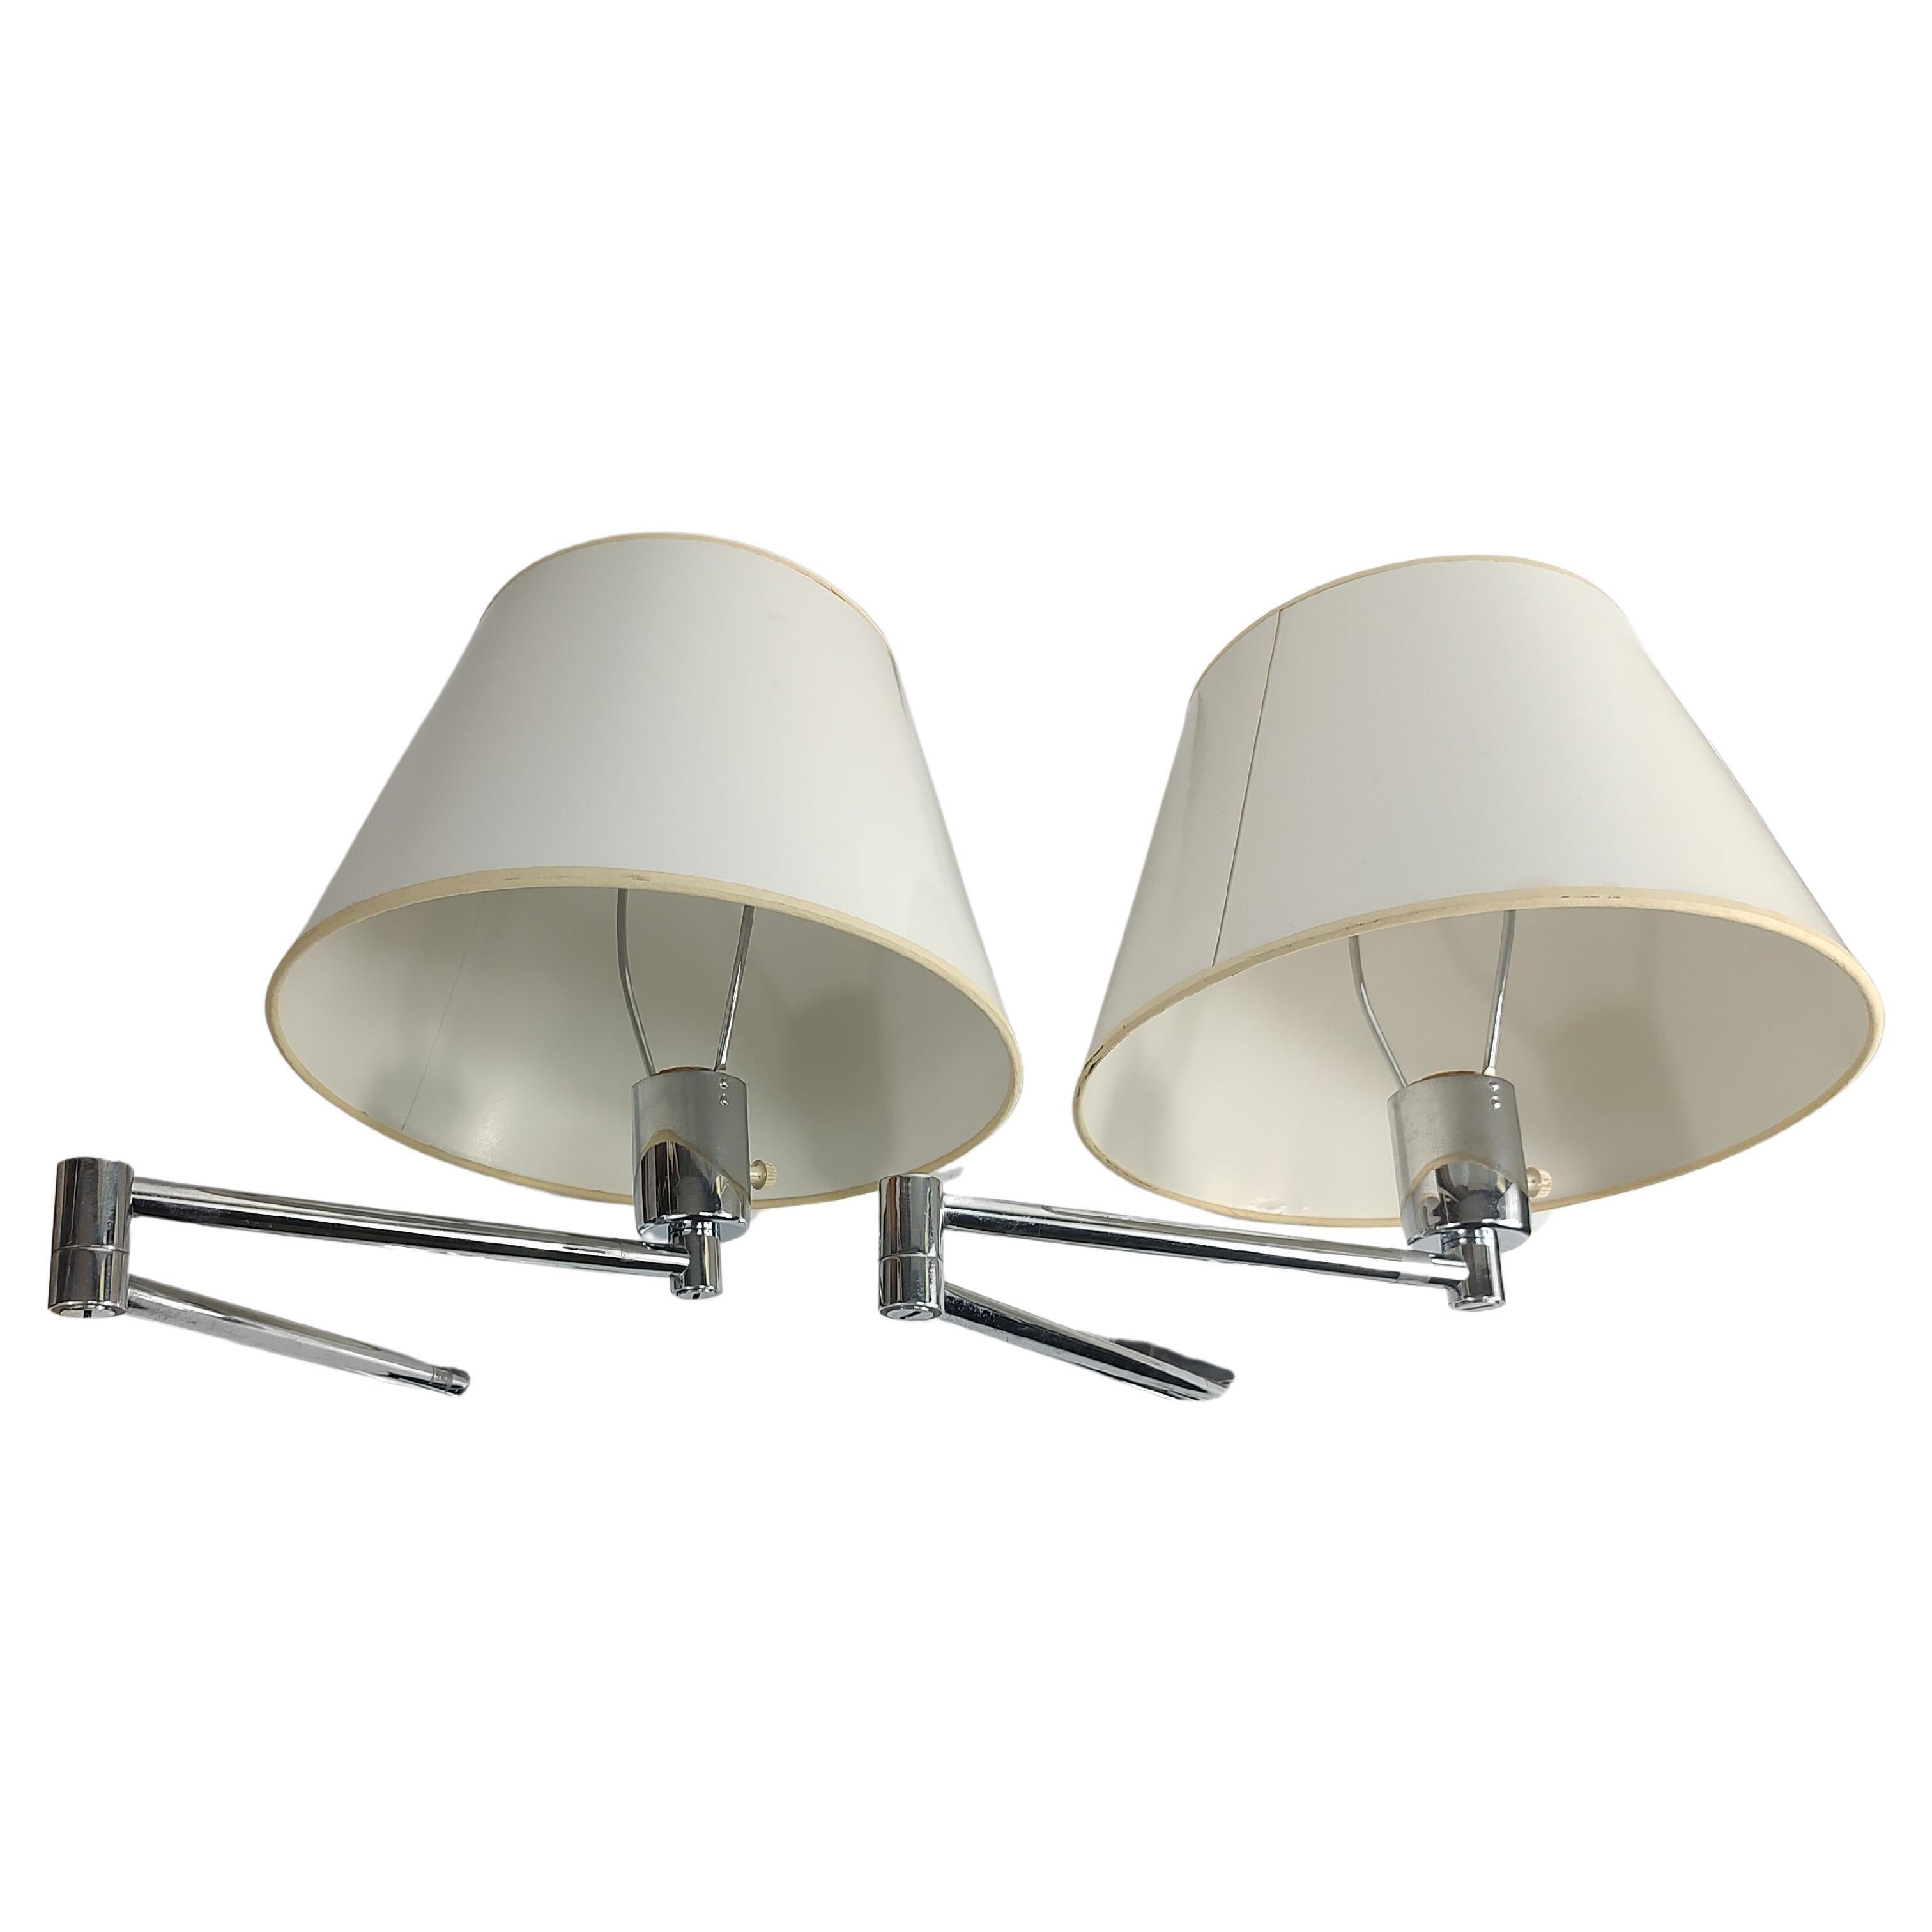 Mid-Century Modern Pair of Mid Century Modern Chrome Swing Arm Wall Sconces By Hansen Lighting Co. For Sale